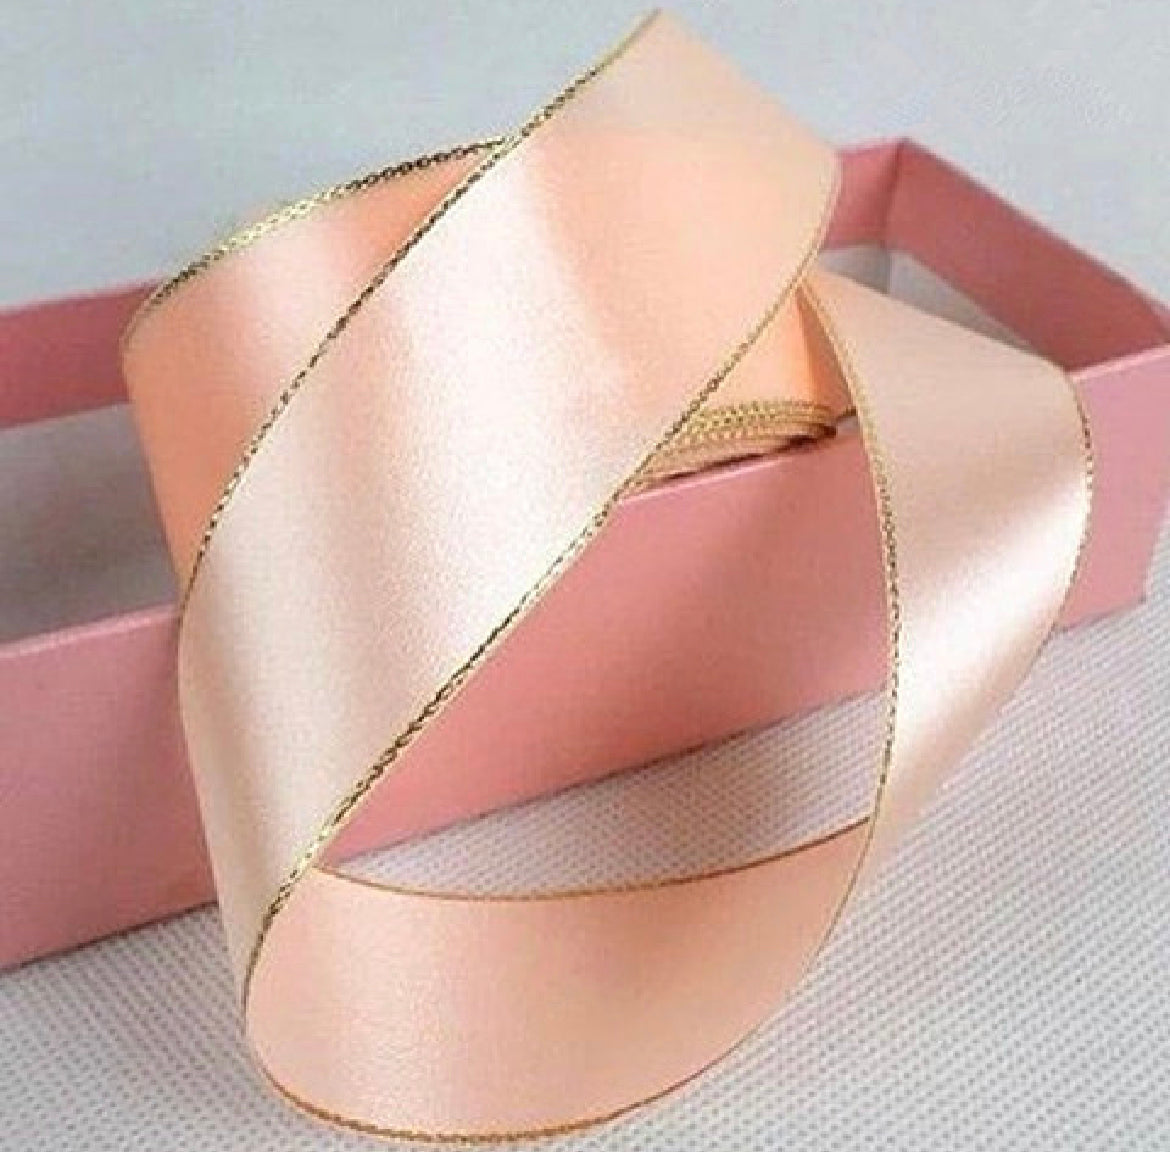 Double Faced Satin Ribbon - Rose Gold